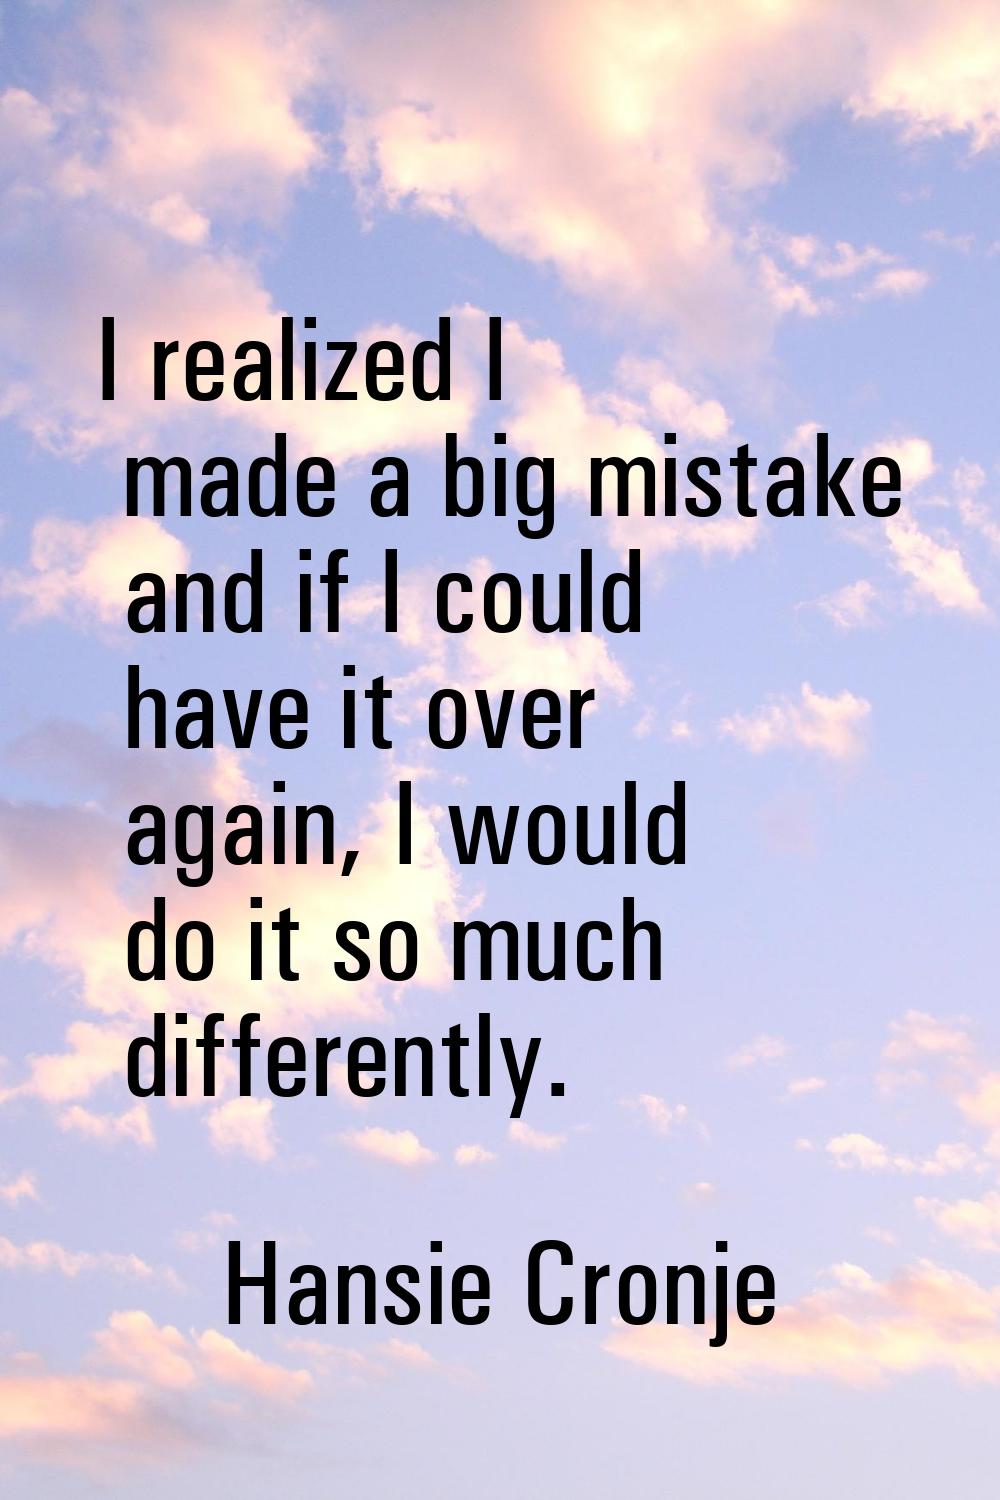 I realized I made a big mistake and if I could have it over again, I would do it so much differentl